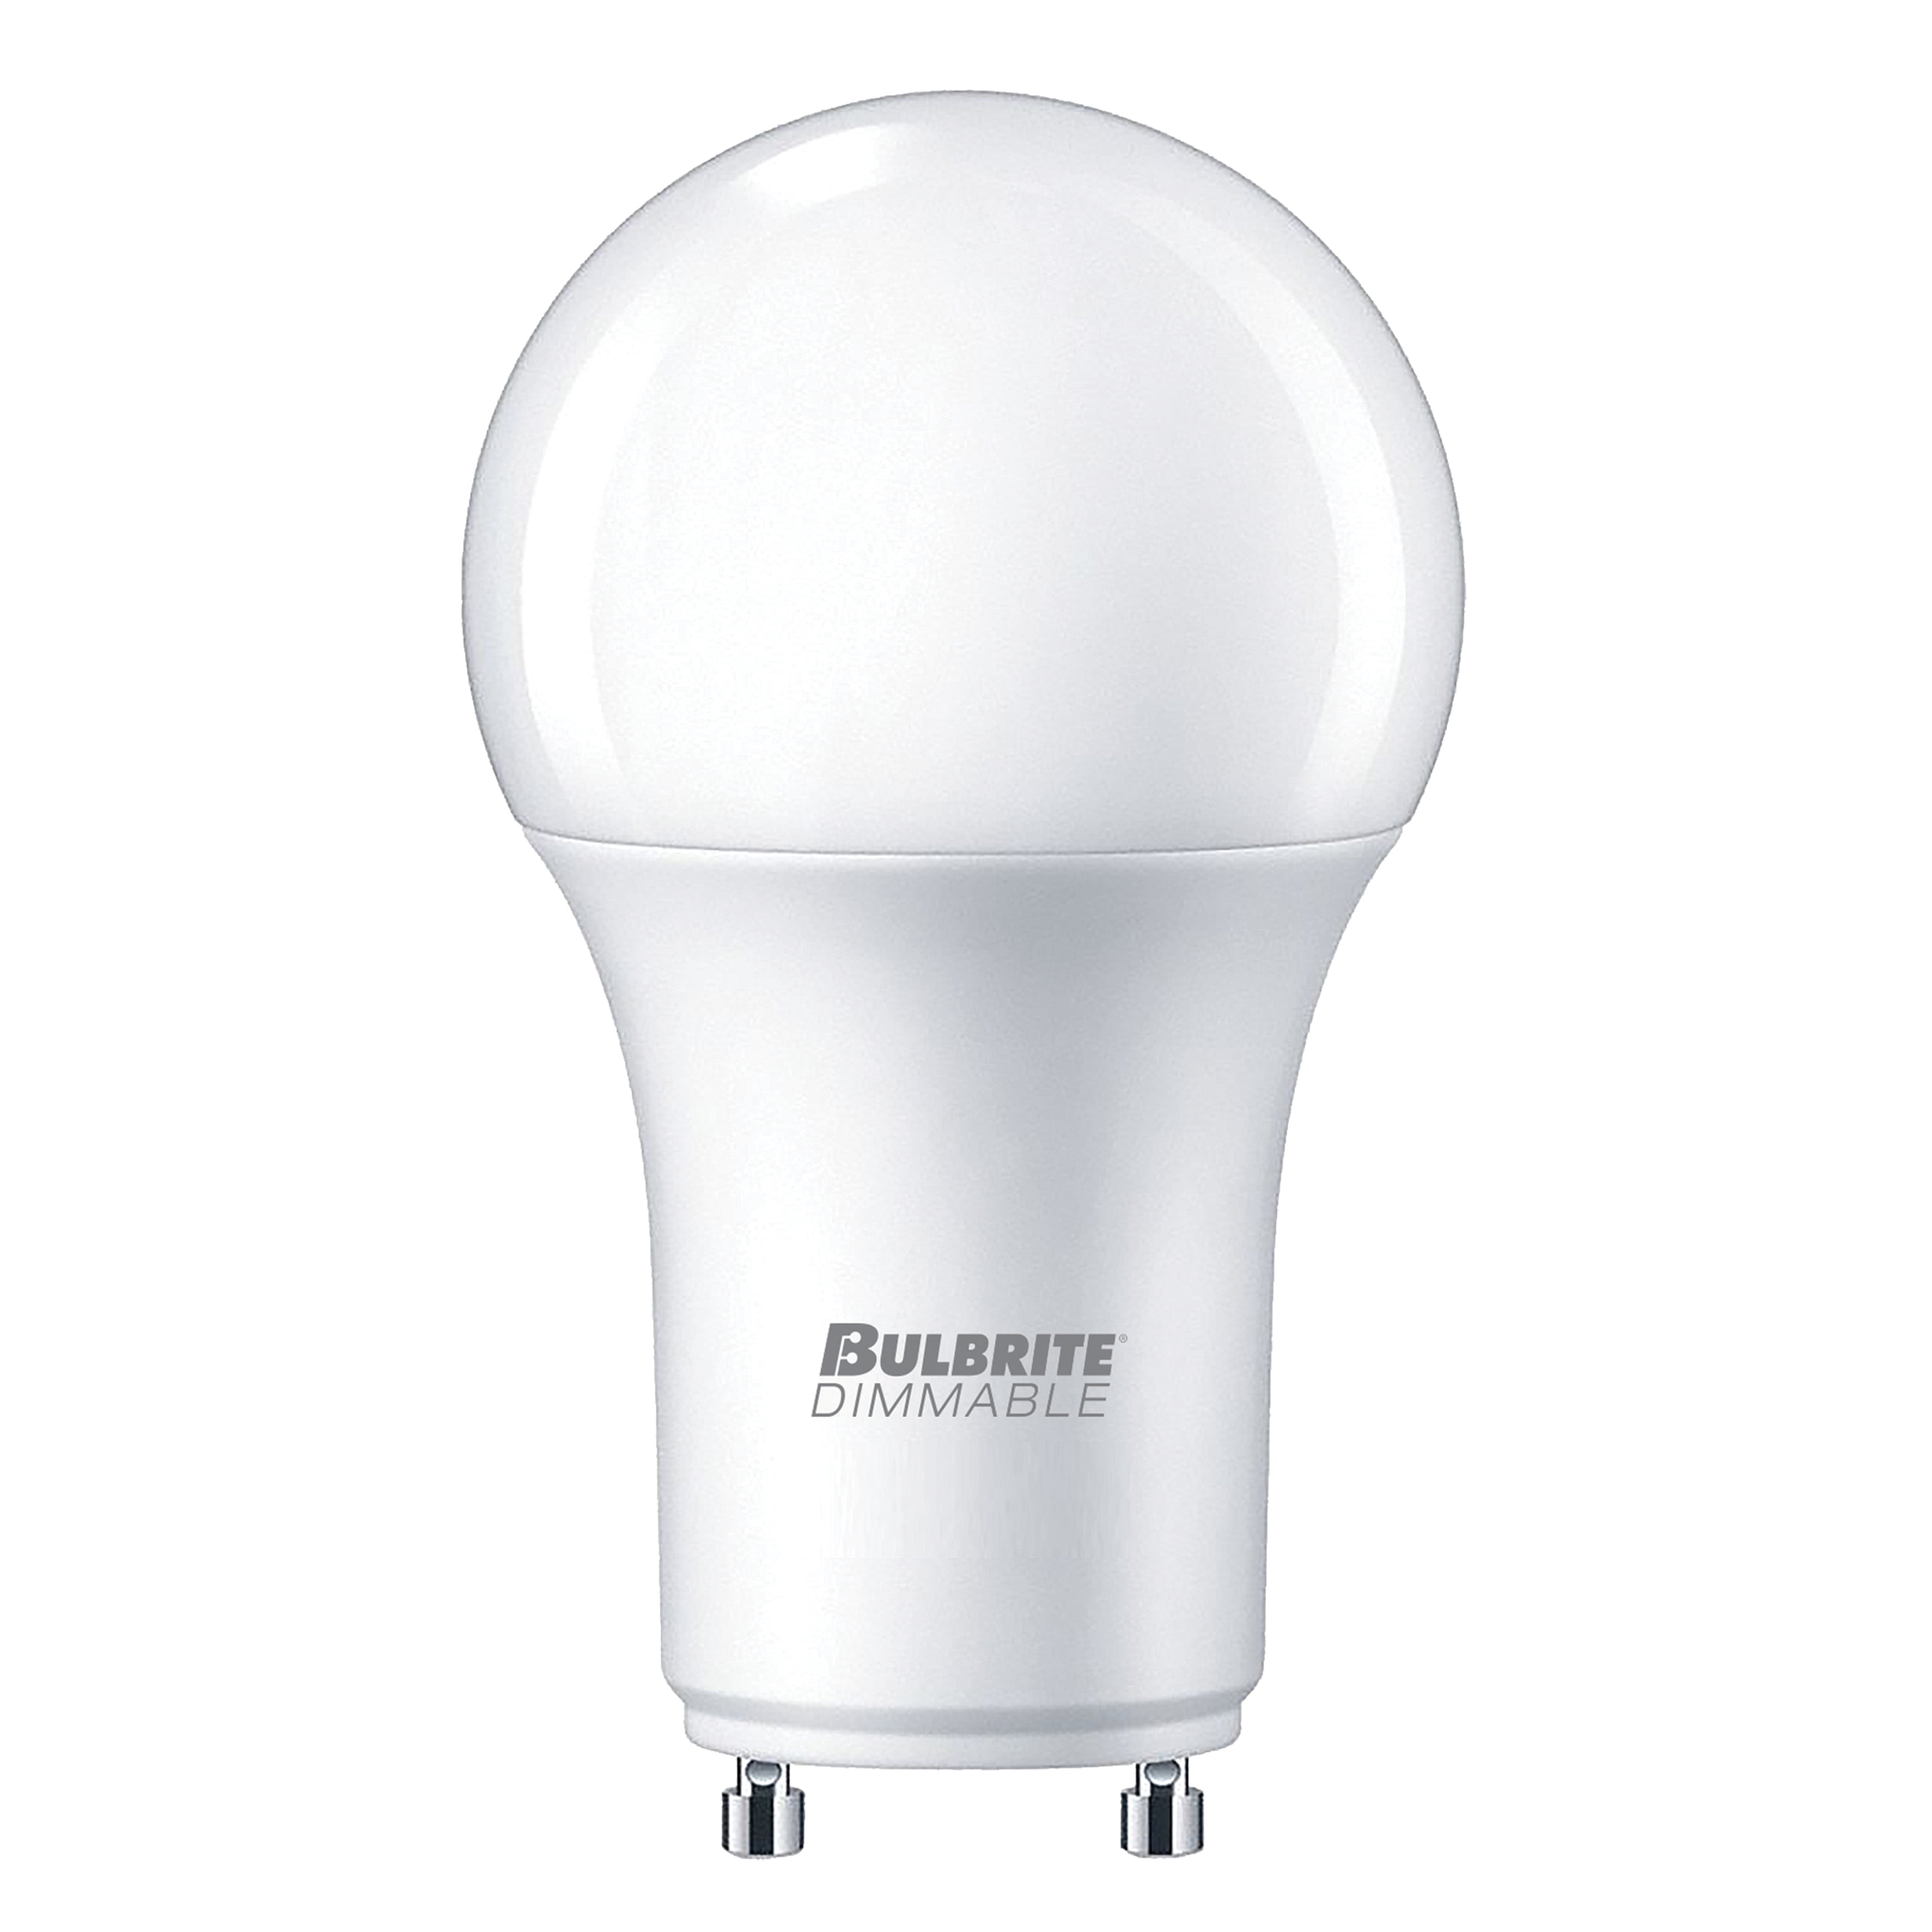 Picture of Bulbrite Pack of (4) 9 Watt Dimmable Frost A19 LED Light Bulbs with Twist and Lock Bi-Pin (GU24) Base  3000K Soft White Light  800 Lumens